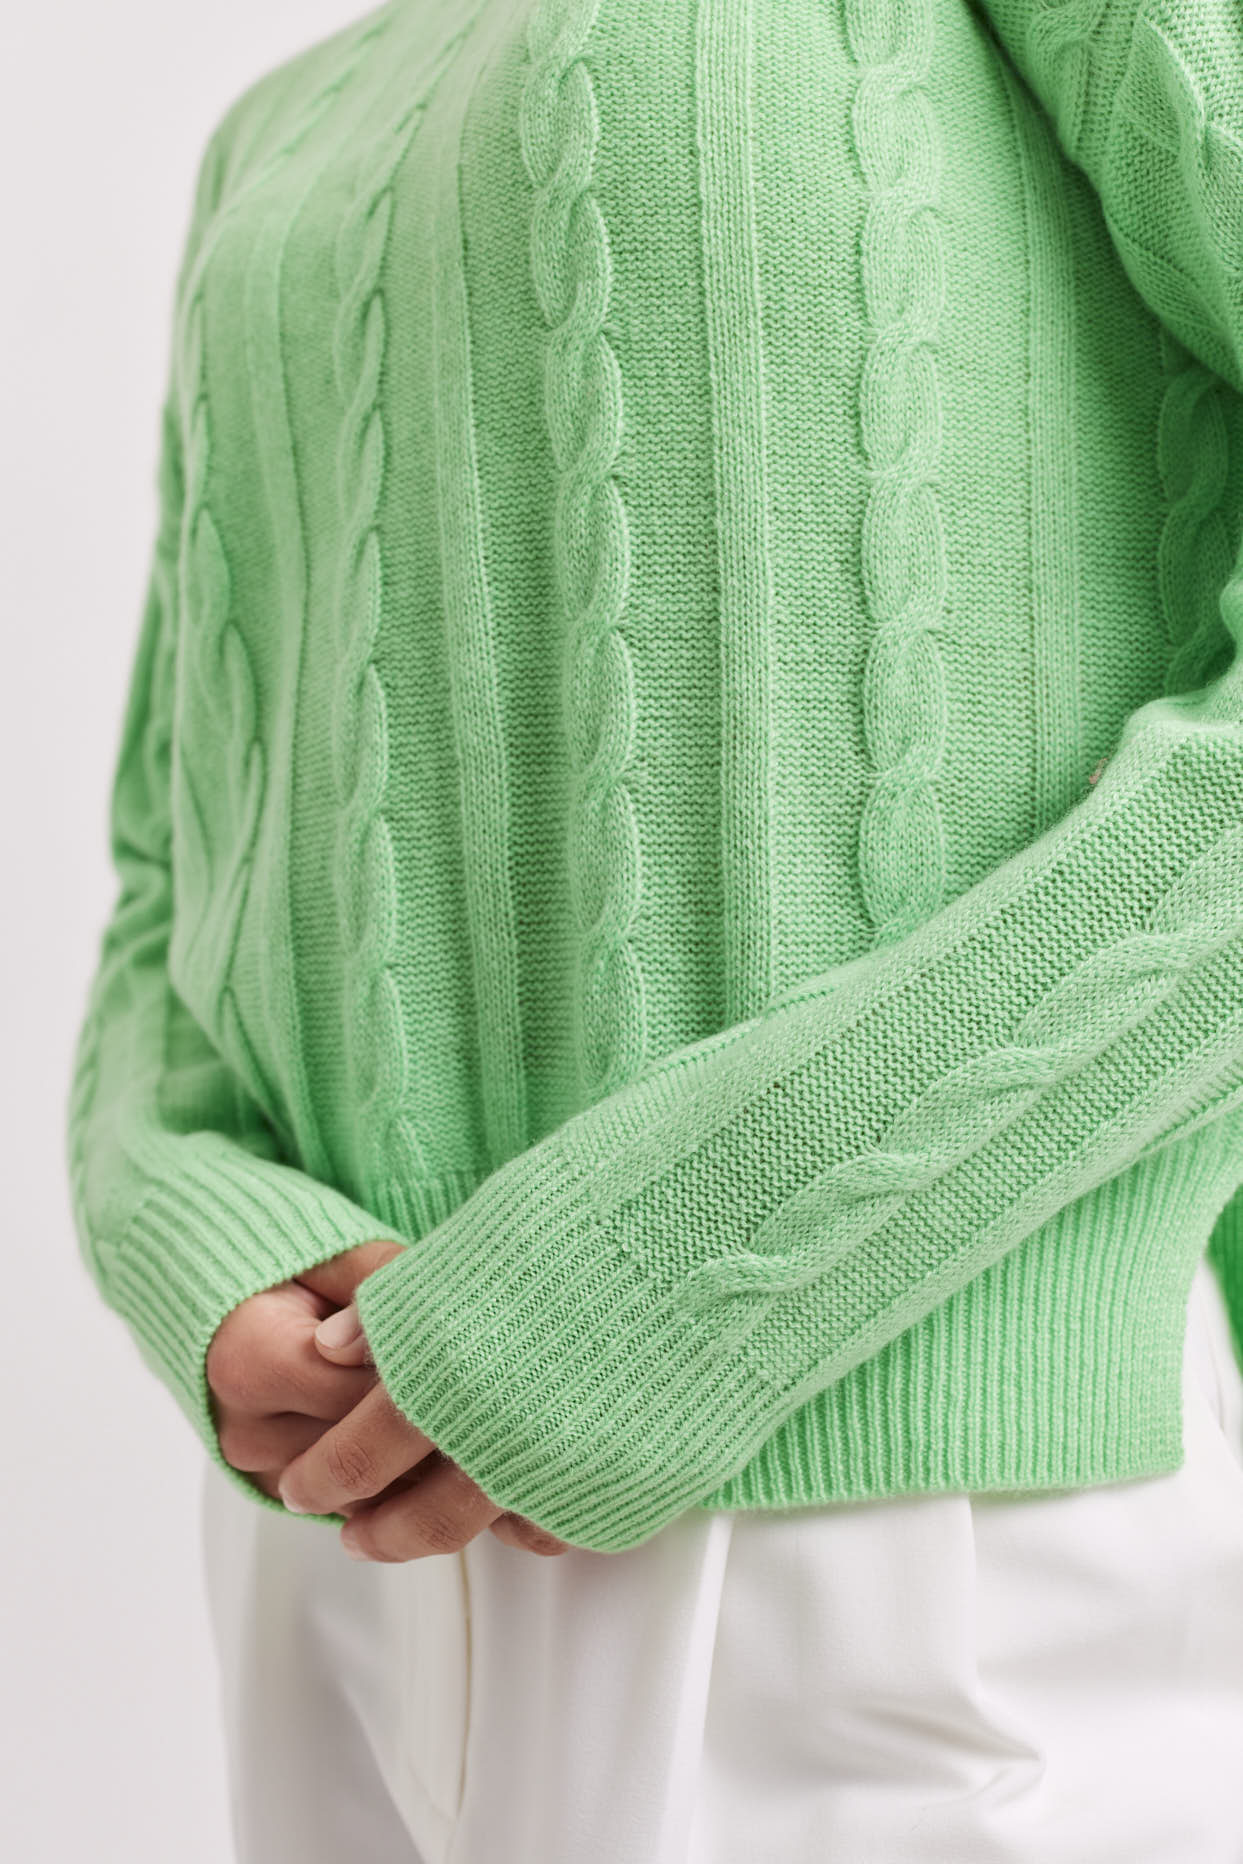 Colbie Sweater - Lime